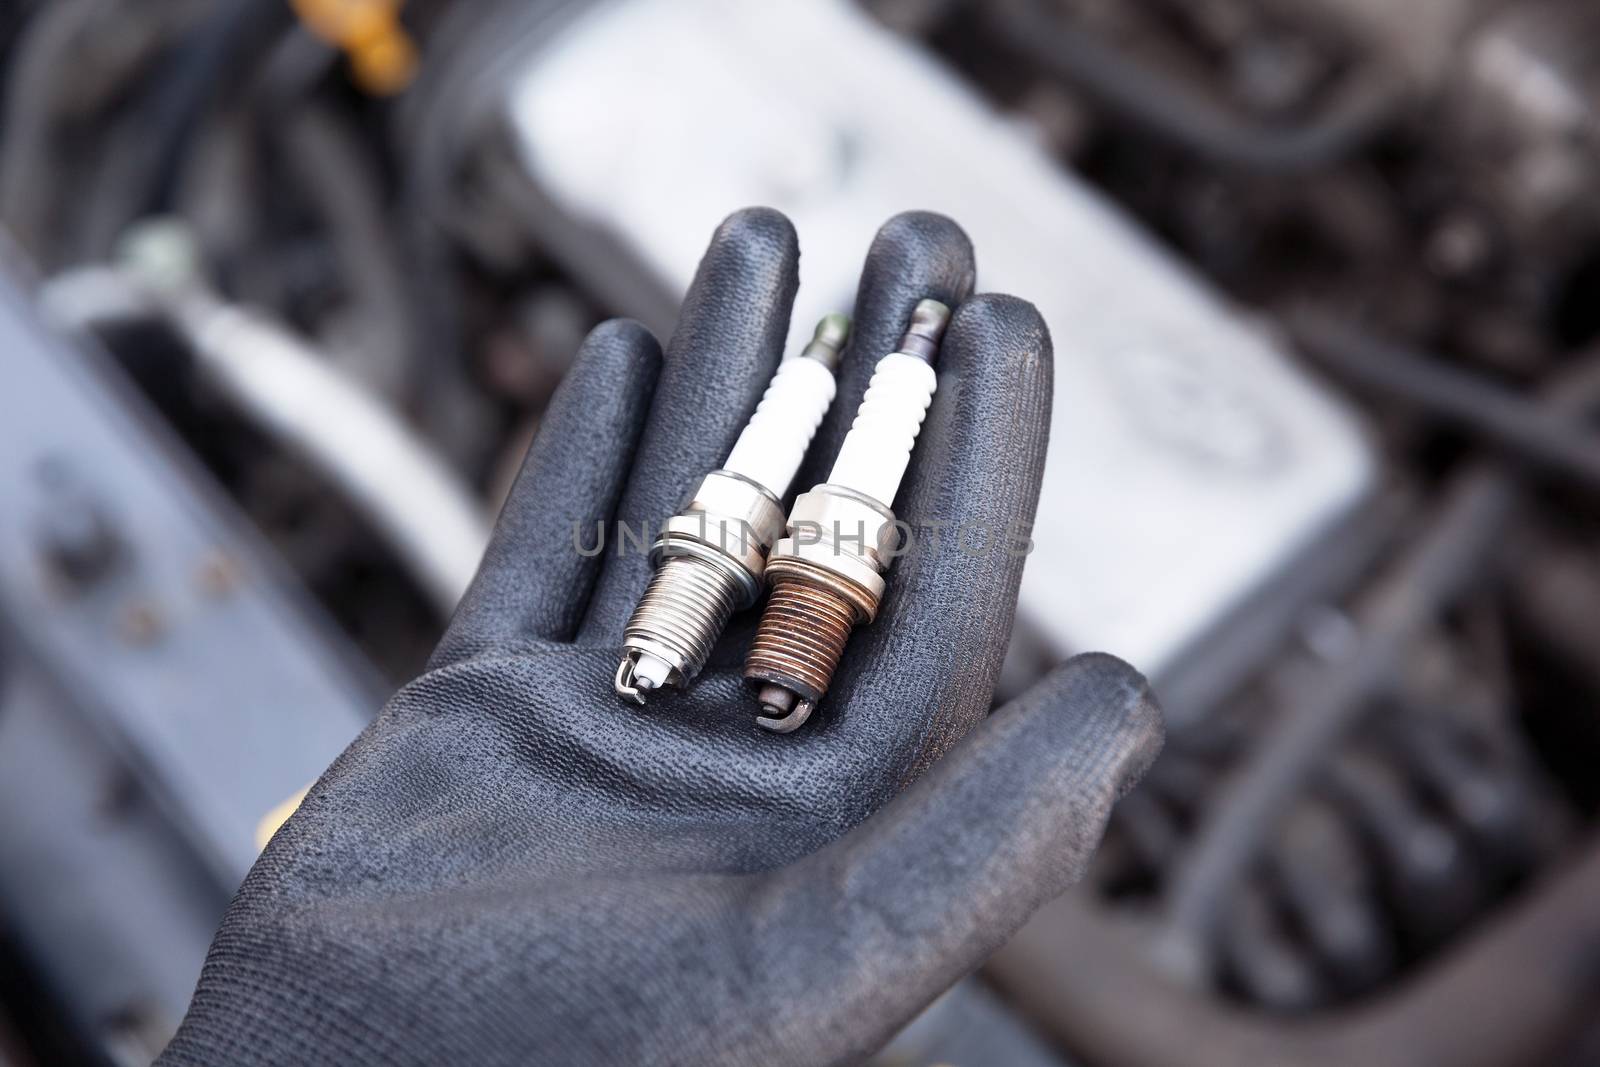 Auto mechanic wearing protective work glove holds old and new spark plugs over a car engine